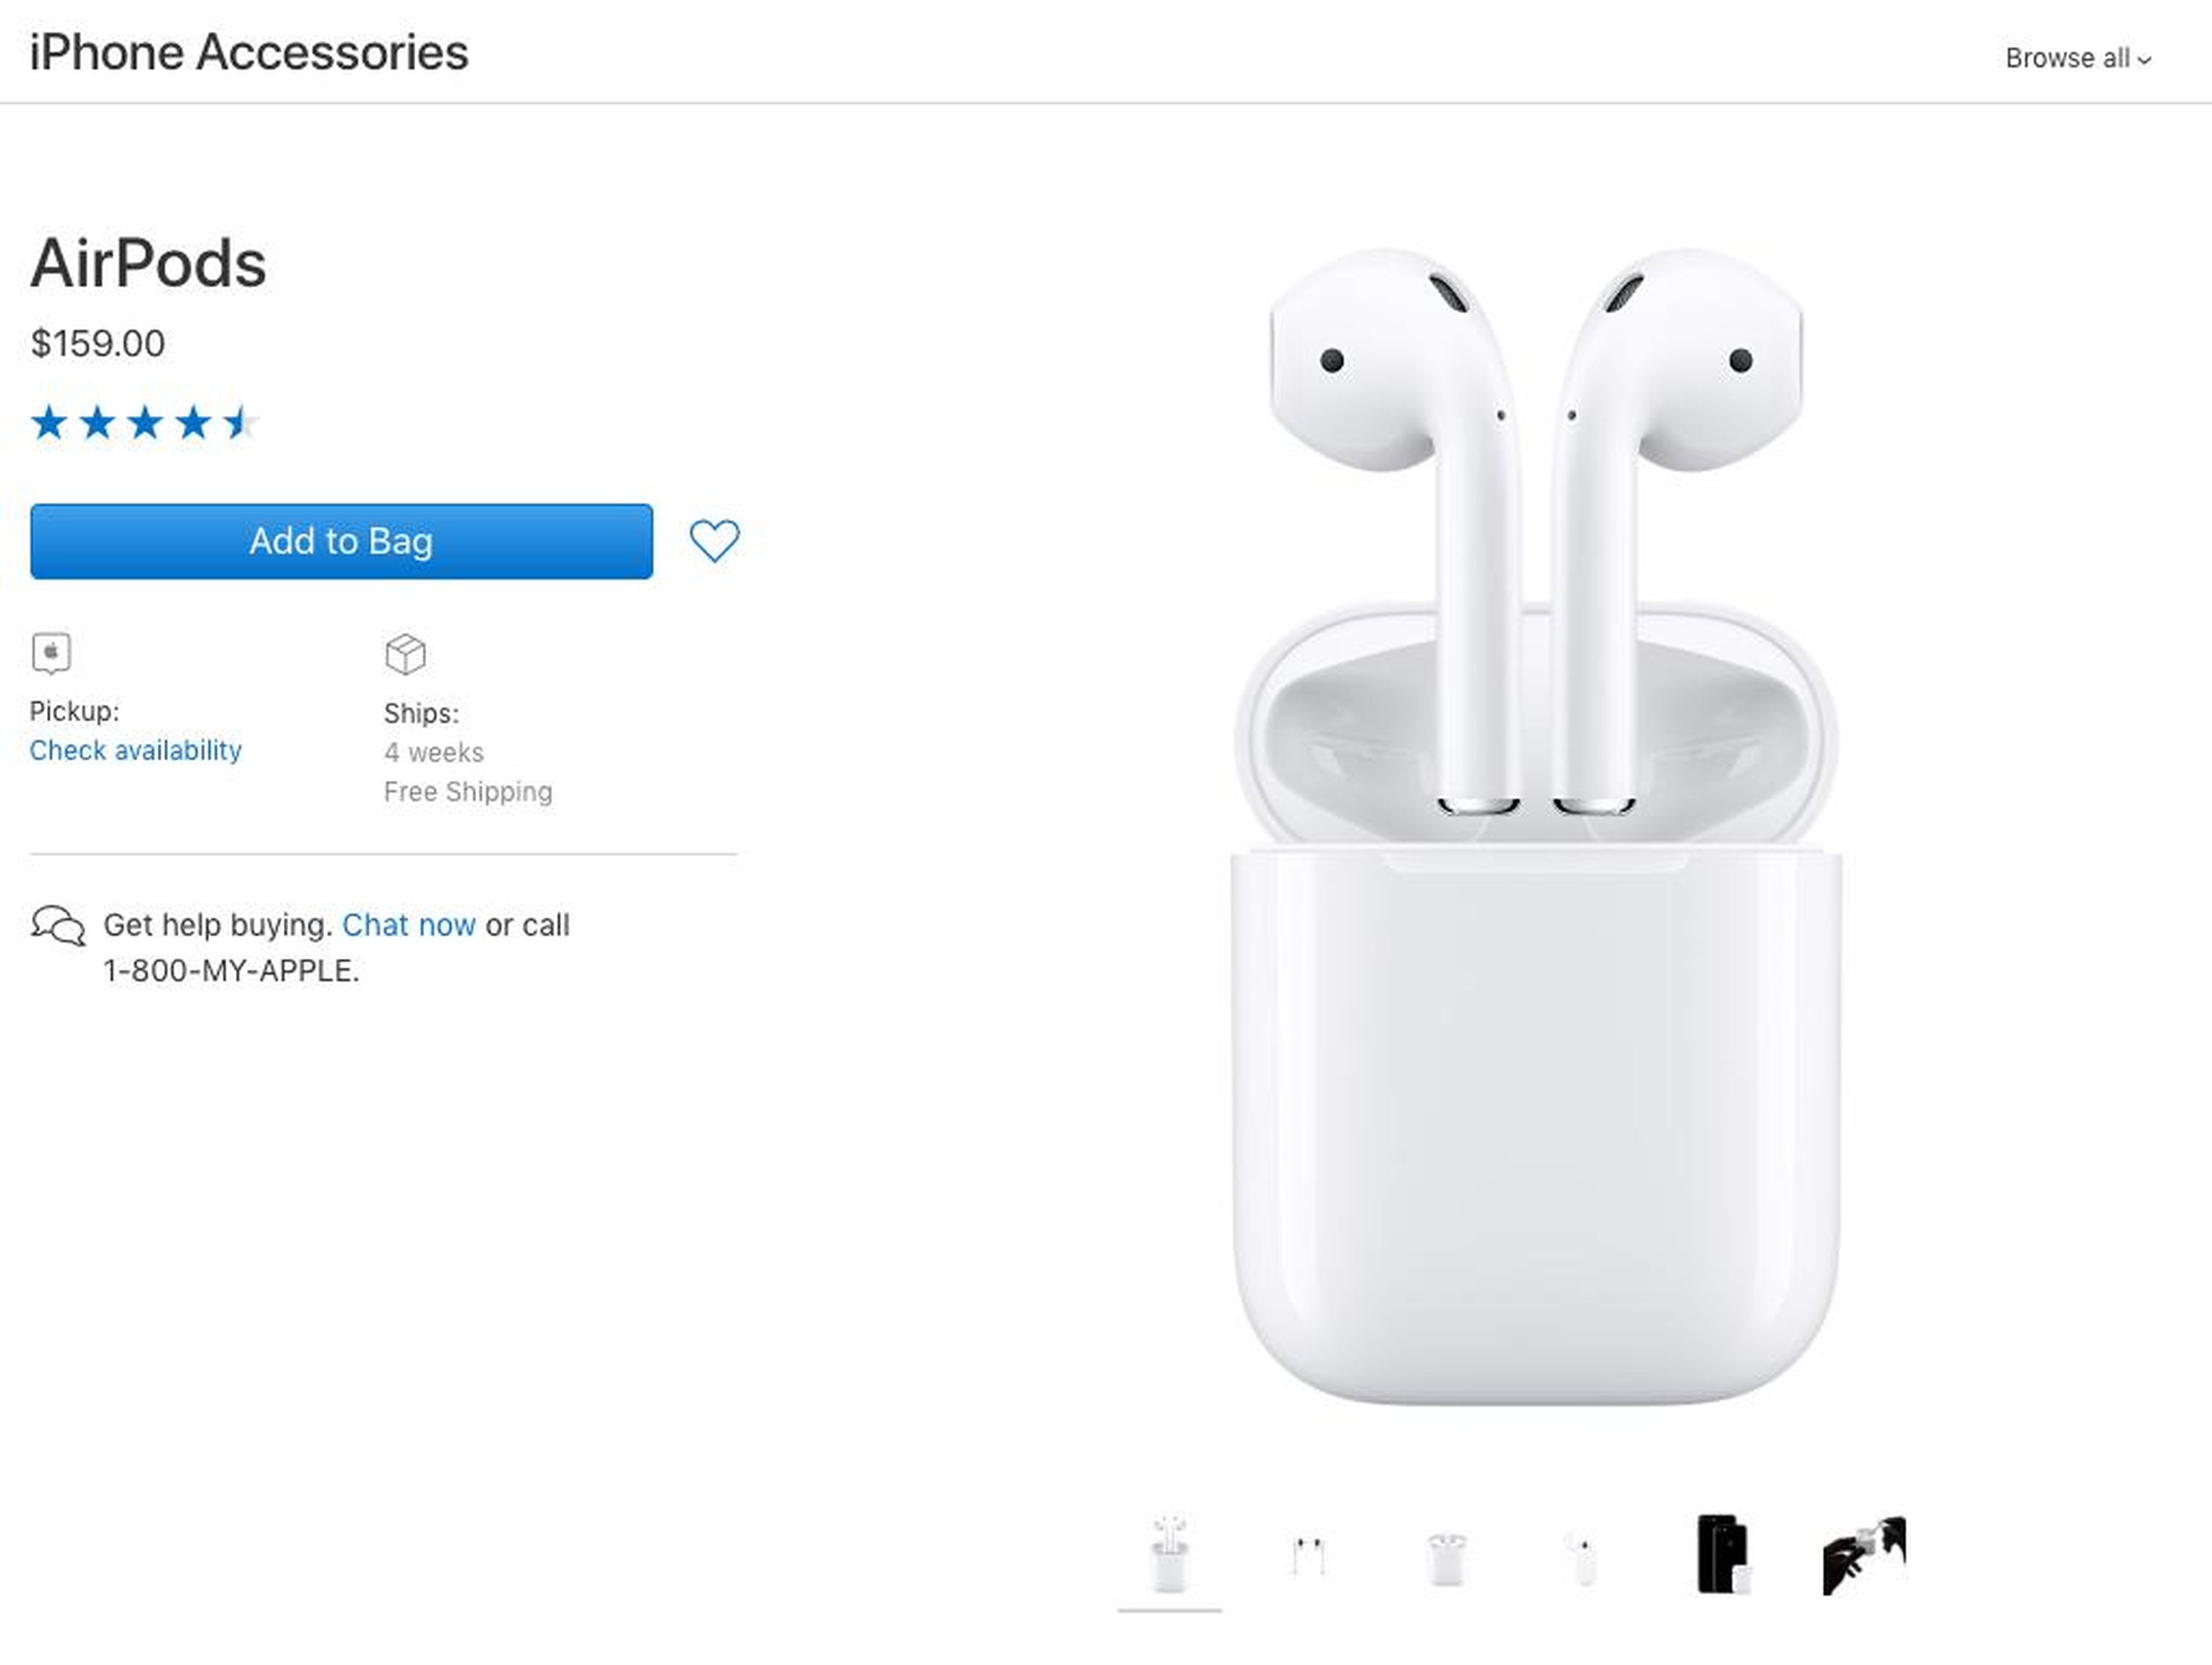 The 2019 AirPods could also include noise-cancellation features and have a higher price than the current $159, according to a different Bloomberg report. Apple is also looking into adding a heart-rate monitor to future AirPods.